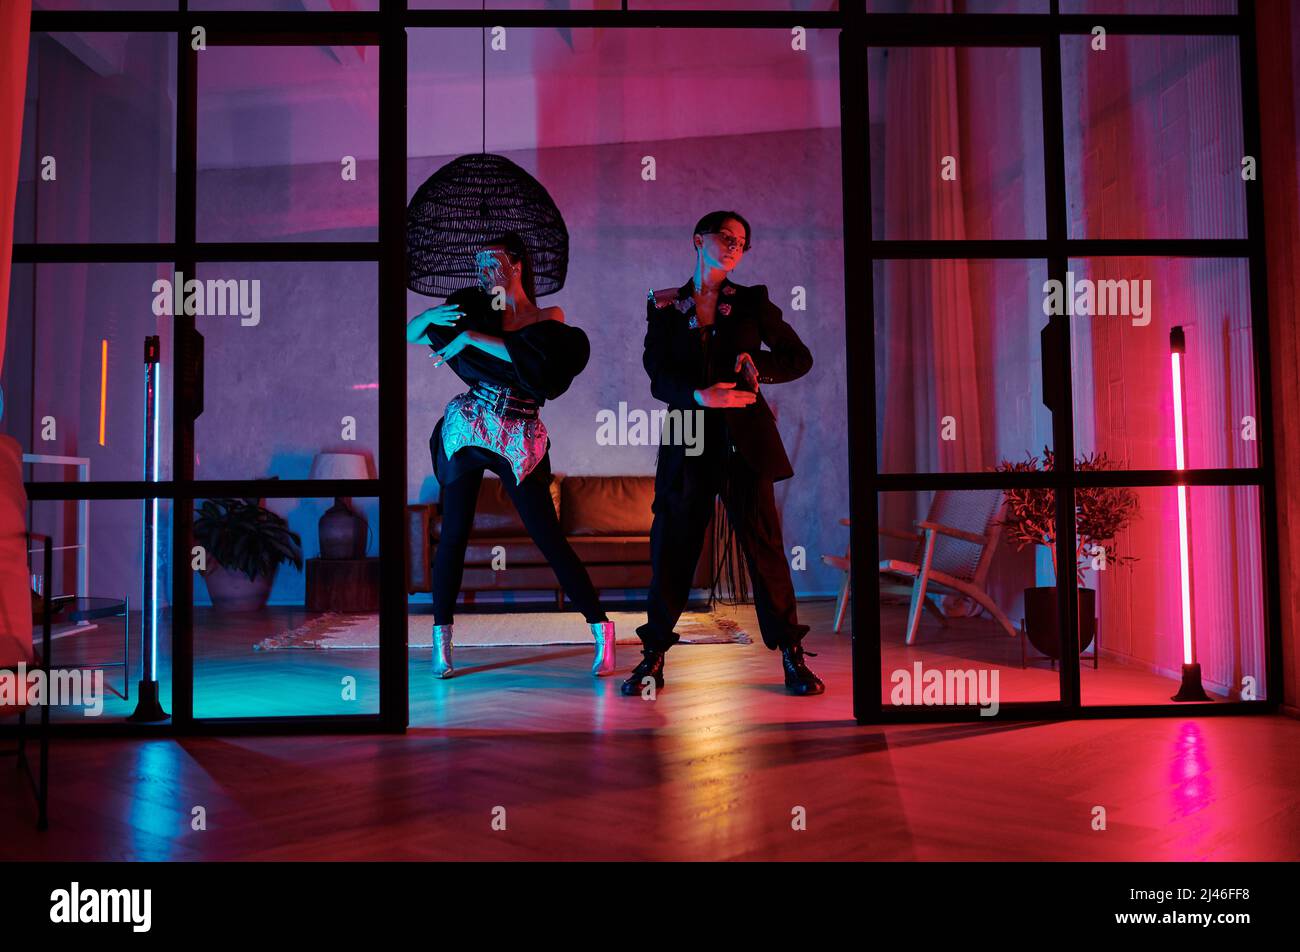 Two dynamic teenagers in posh attire performing vogue dance in loft studio, apartment or night club lit by pink and blue neon lights Stock Photo